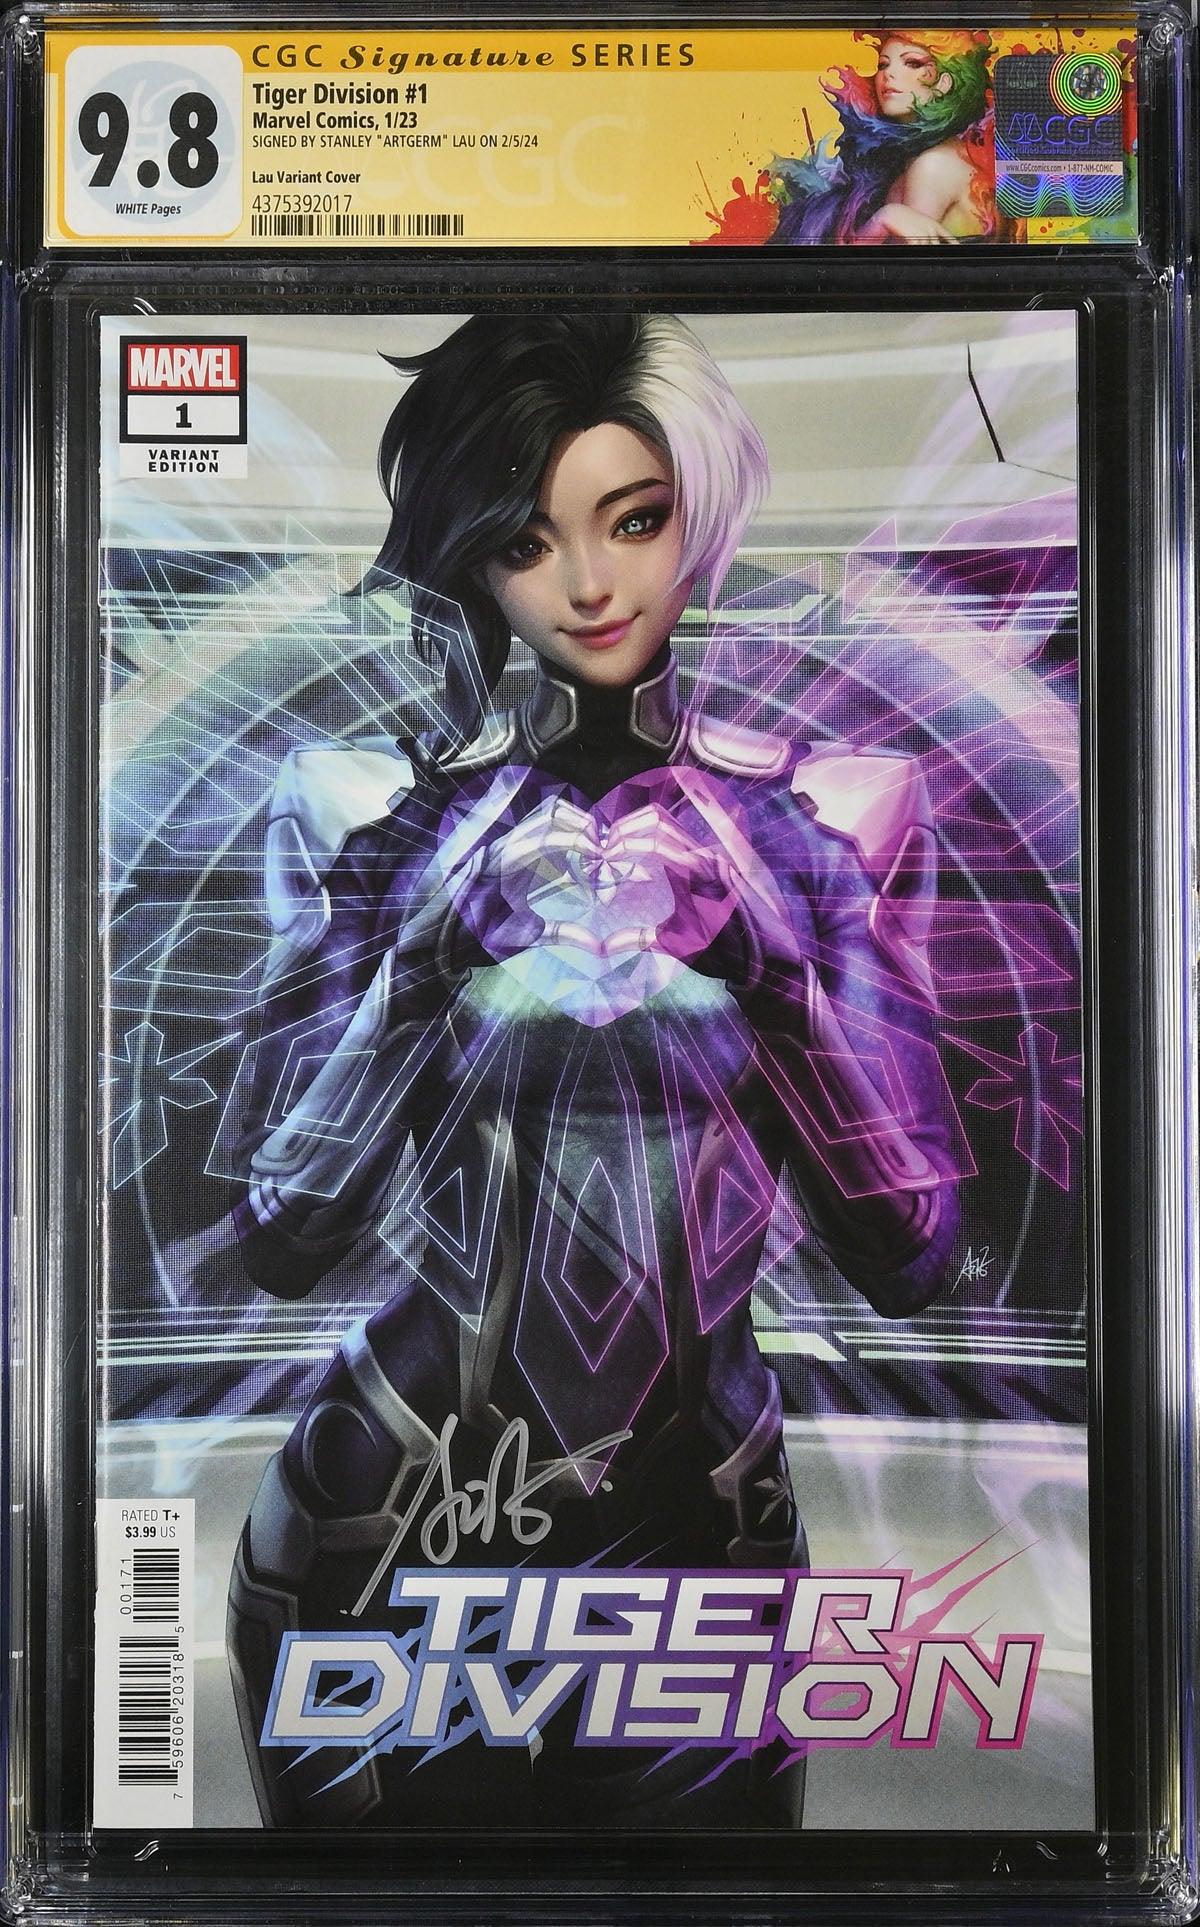 CGC TIGER DIVISION #1 LAU VARIANT (9.8) SIGNATURE SERIES - SIGNED BY STANLEY "ARTGERM" LAU - Kings Comics